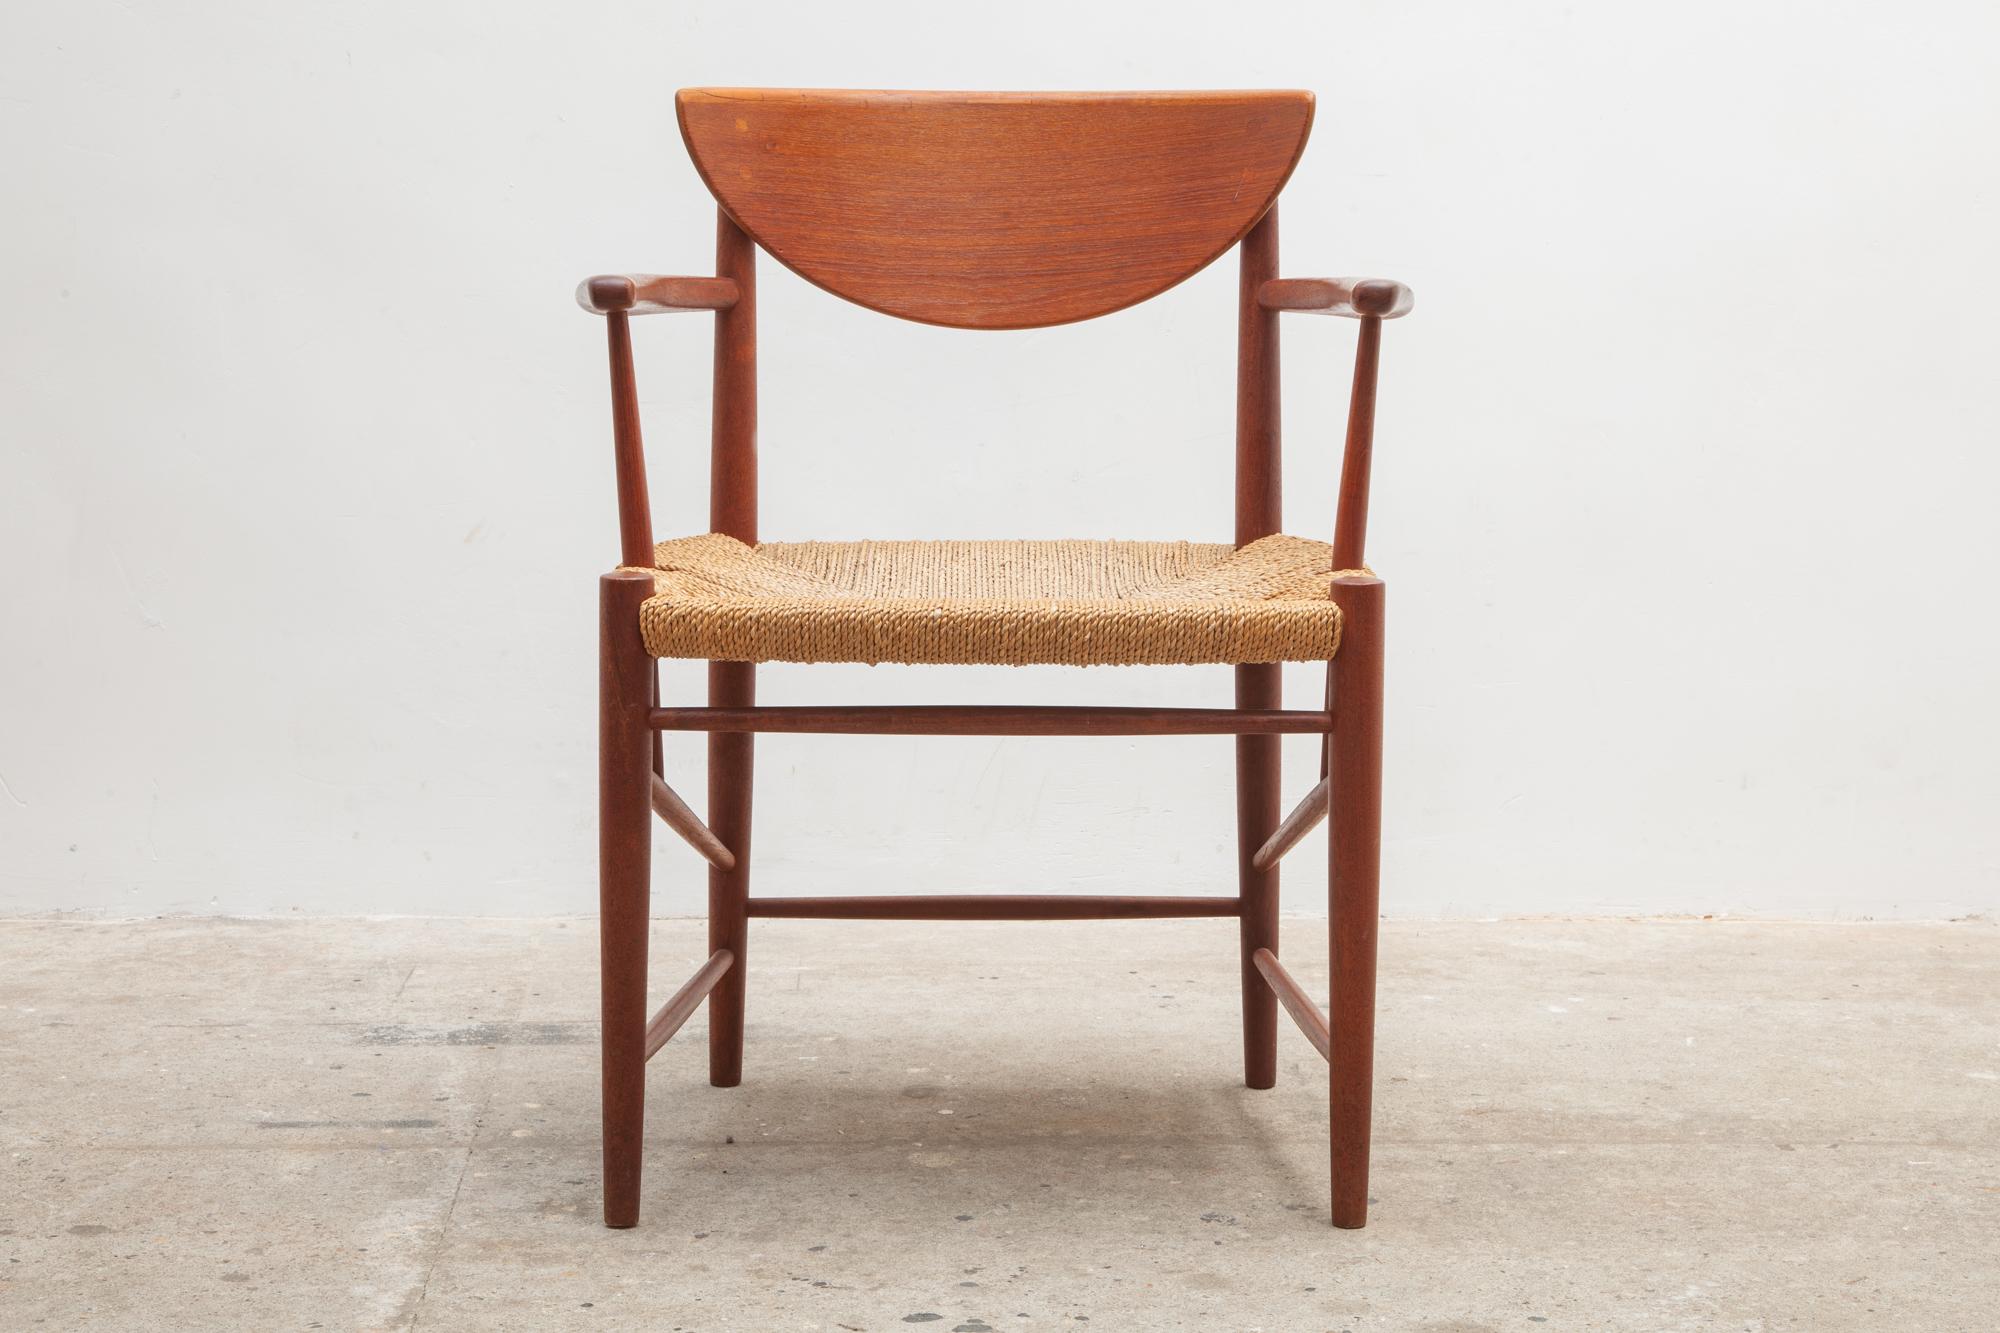 Mid-Century Modern teak dining, side set of two arms chairs in solid teak with sleek spindle legs and woven seats designed in the early 1950s by Peter Hvidt and Orla Mølgaard-Nielsen for the Manufacture
Soborg Mobler in 1956.
Dimensions: Chairs 60